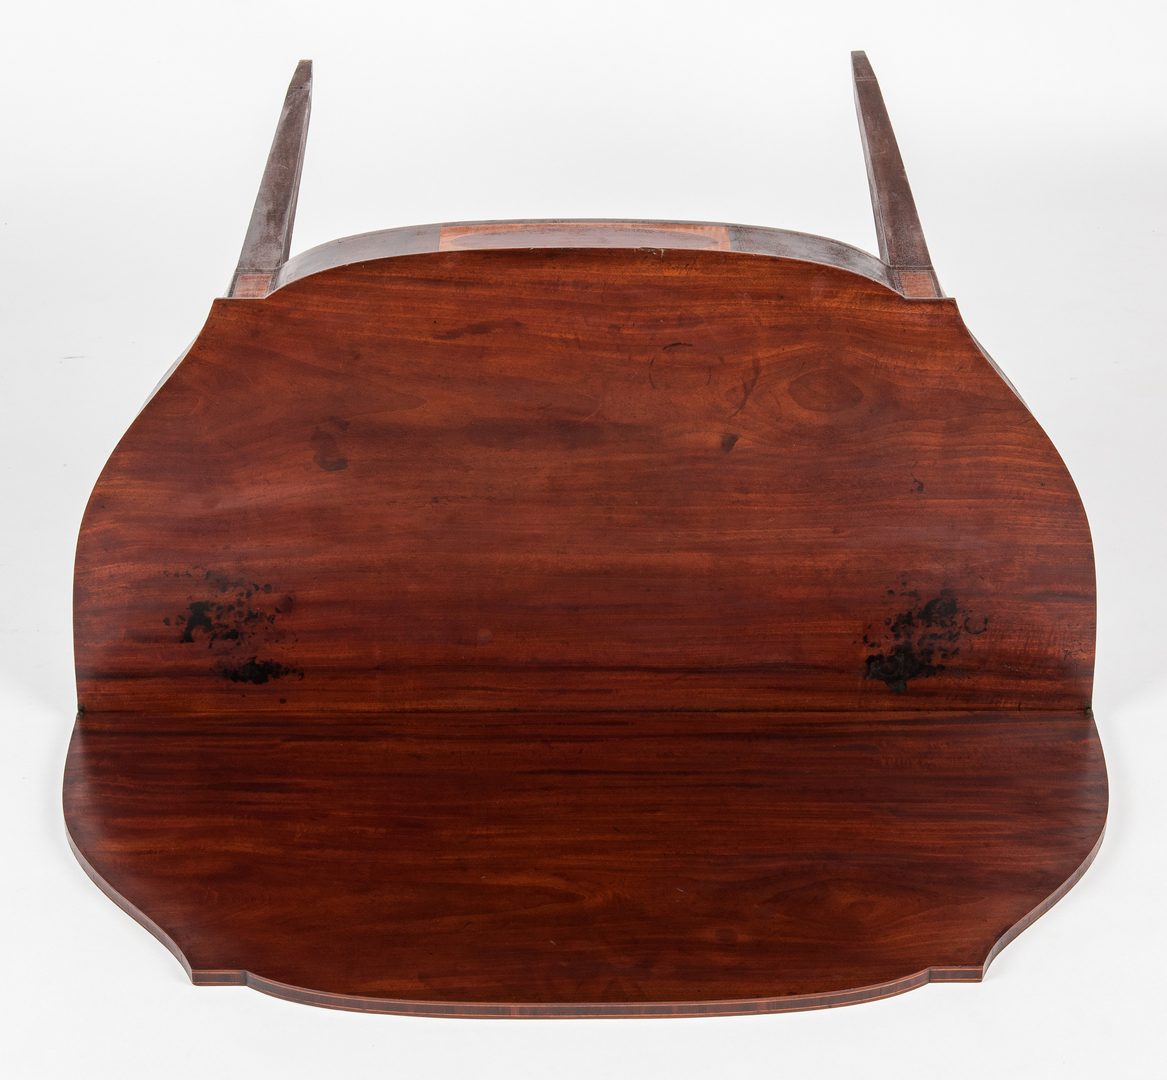 Lot 133: Federal Inlaid Game Table, Seymour School